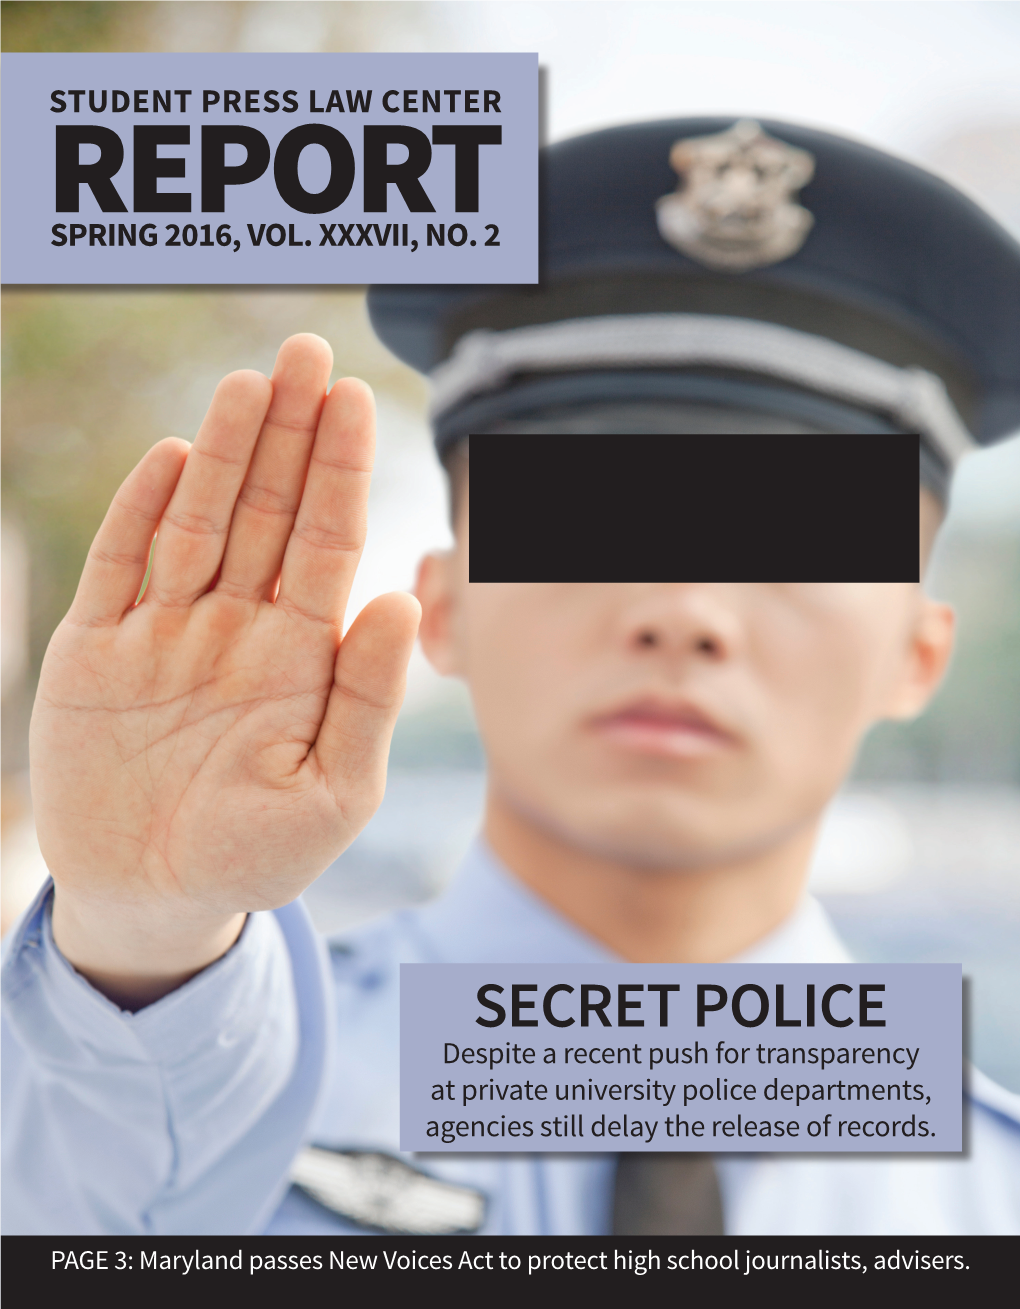 Secret Police Despite a Recent Push for Transparency at Private University Police Departments, Agencies Still Delay the Release of Records